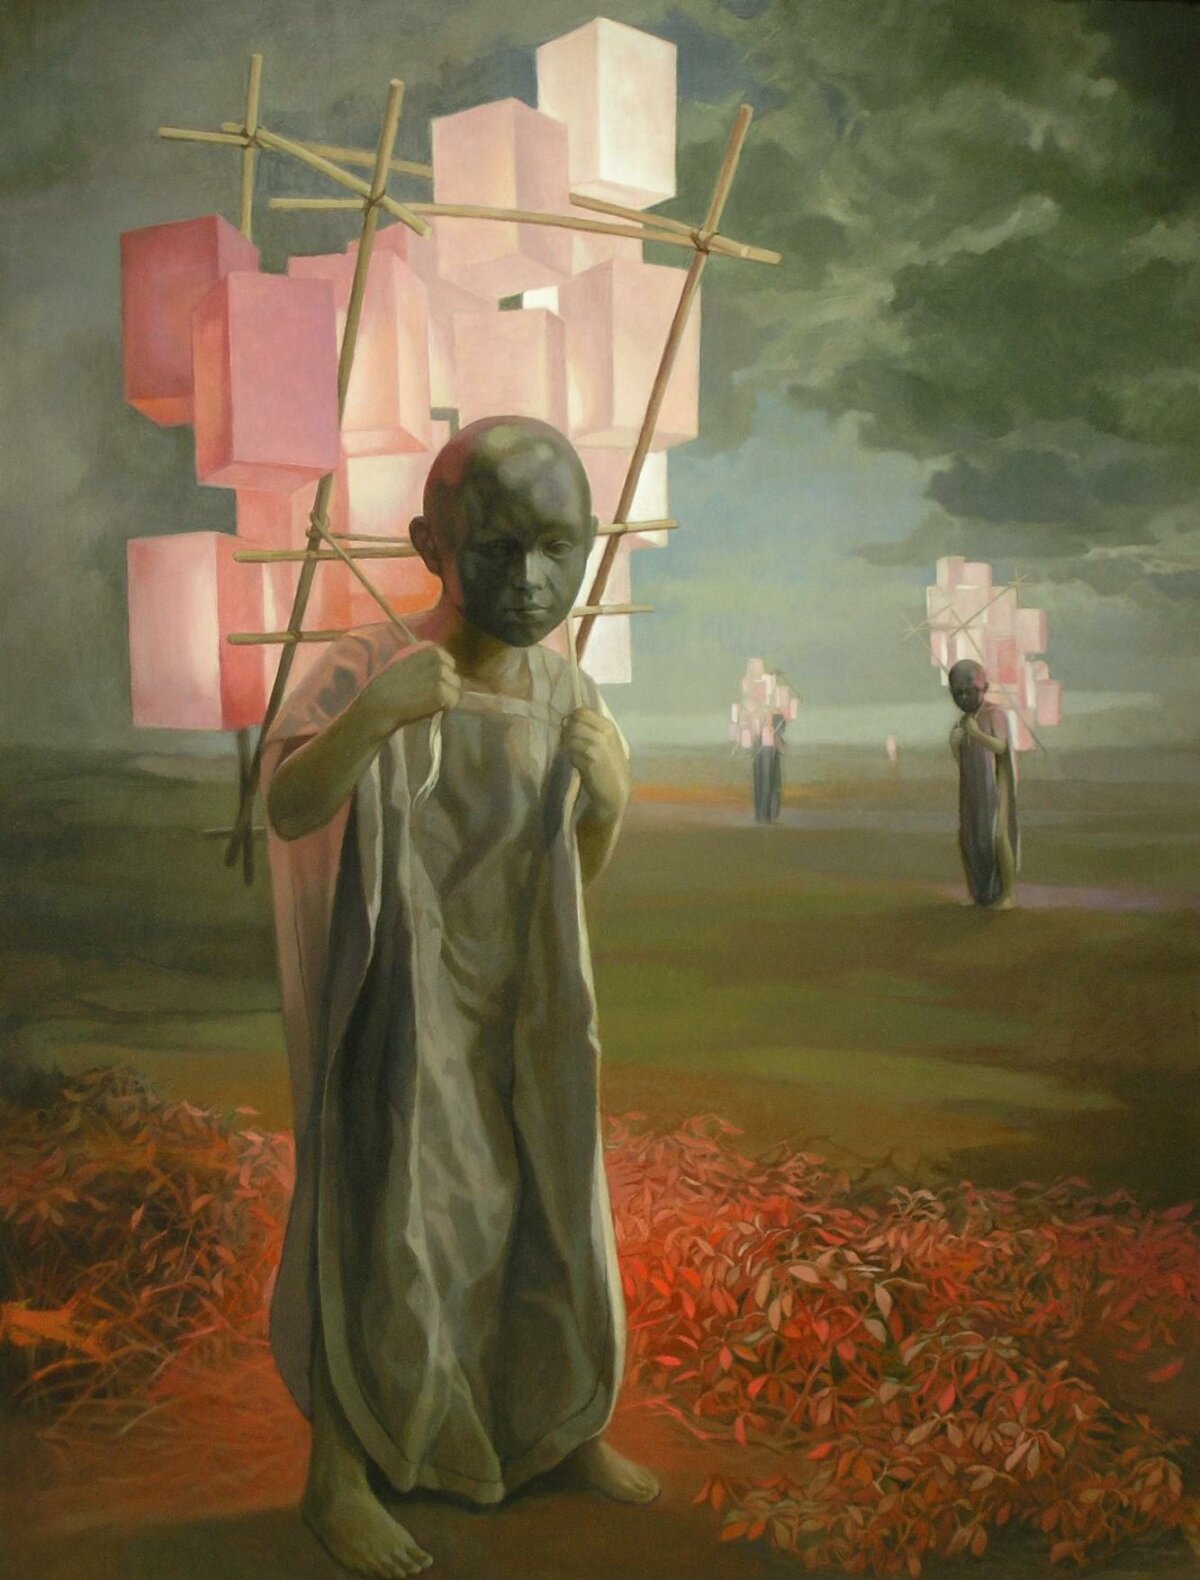 The Formidable Surrealist Oil And Resin Paintings Of Miroslaw Siara 5